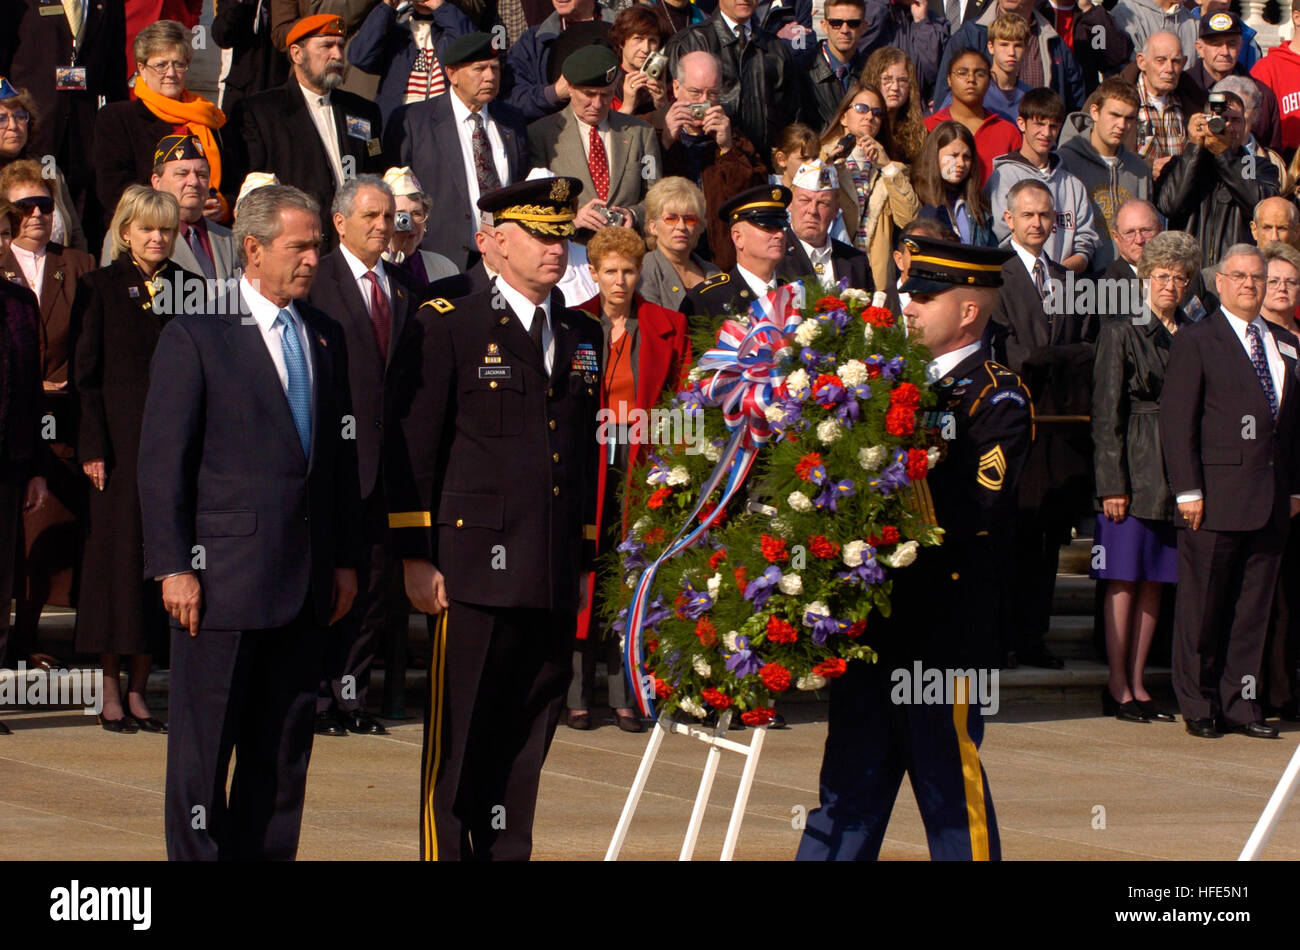 041111-G-3024G-787 Arlington National Cemetery, Va. (Nov. 11, 2004) Ð President George W. Bush and Commanding General, Maj. Gen. Galen B. Jackman pay respects to the unknown servicemen laid to rest at the Tomb of the Unknowns in Arlington National Cemetery, Va., during a VeteranÕs Day ceremony. U.S. Coast Guard photo by Petty Officer 1st Class John Gaffney (RELEASED) US Navy 041111-G-3024G-787 President George W. Bush and Commanding General, Maj. Gen. Galen B. Jackman pay respects to the unknown servicemen laid to rest at the Tomb of the Unknowns Stock Photo